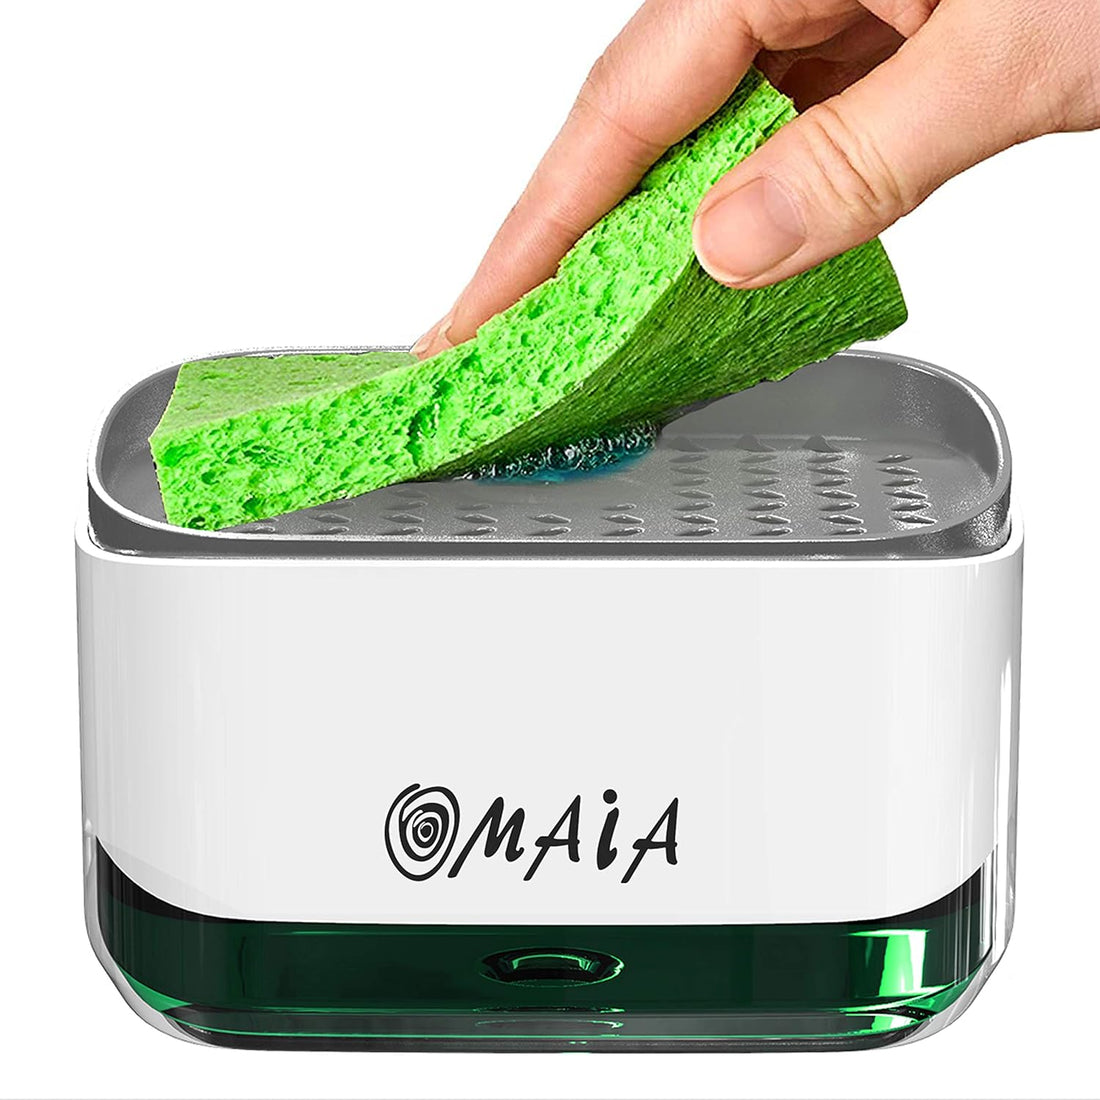 OMAIA 2-in-1 Kitchen Soap Dispenser with Sponge Holder - Refillable Dishwashing Liquid Container with Pump & Tray - Useful Kitchen Gadgets - Sink Countertop Organizer for Home, Restaurant, Not Rusted